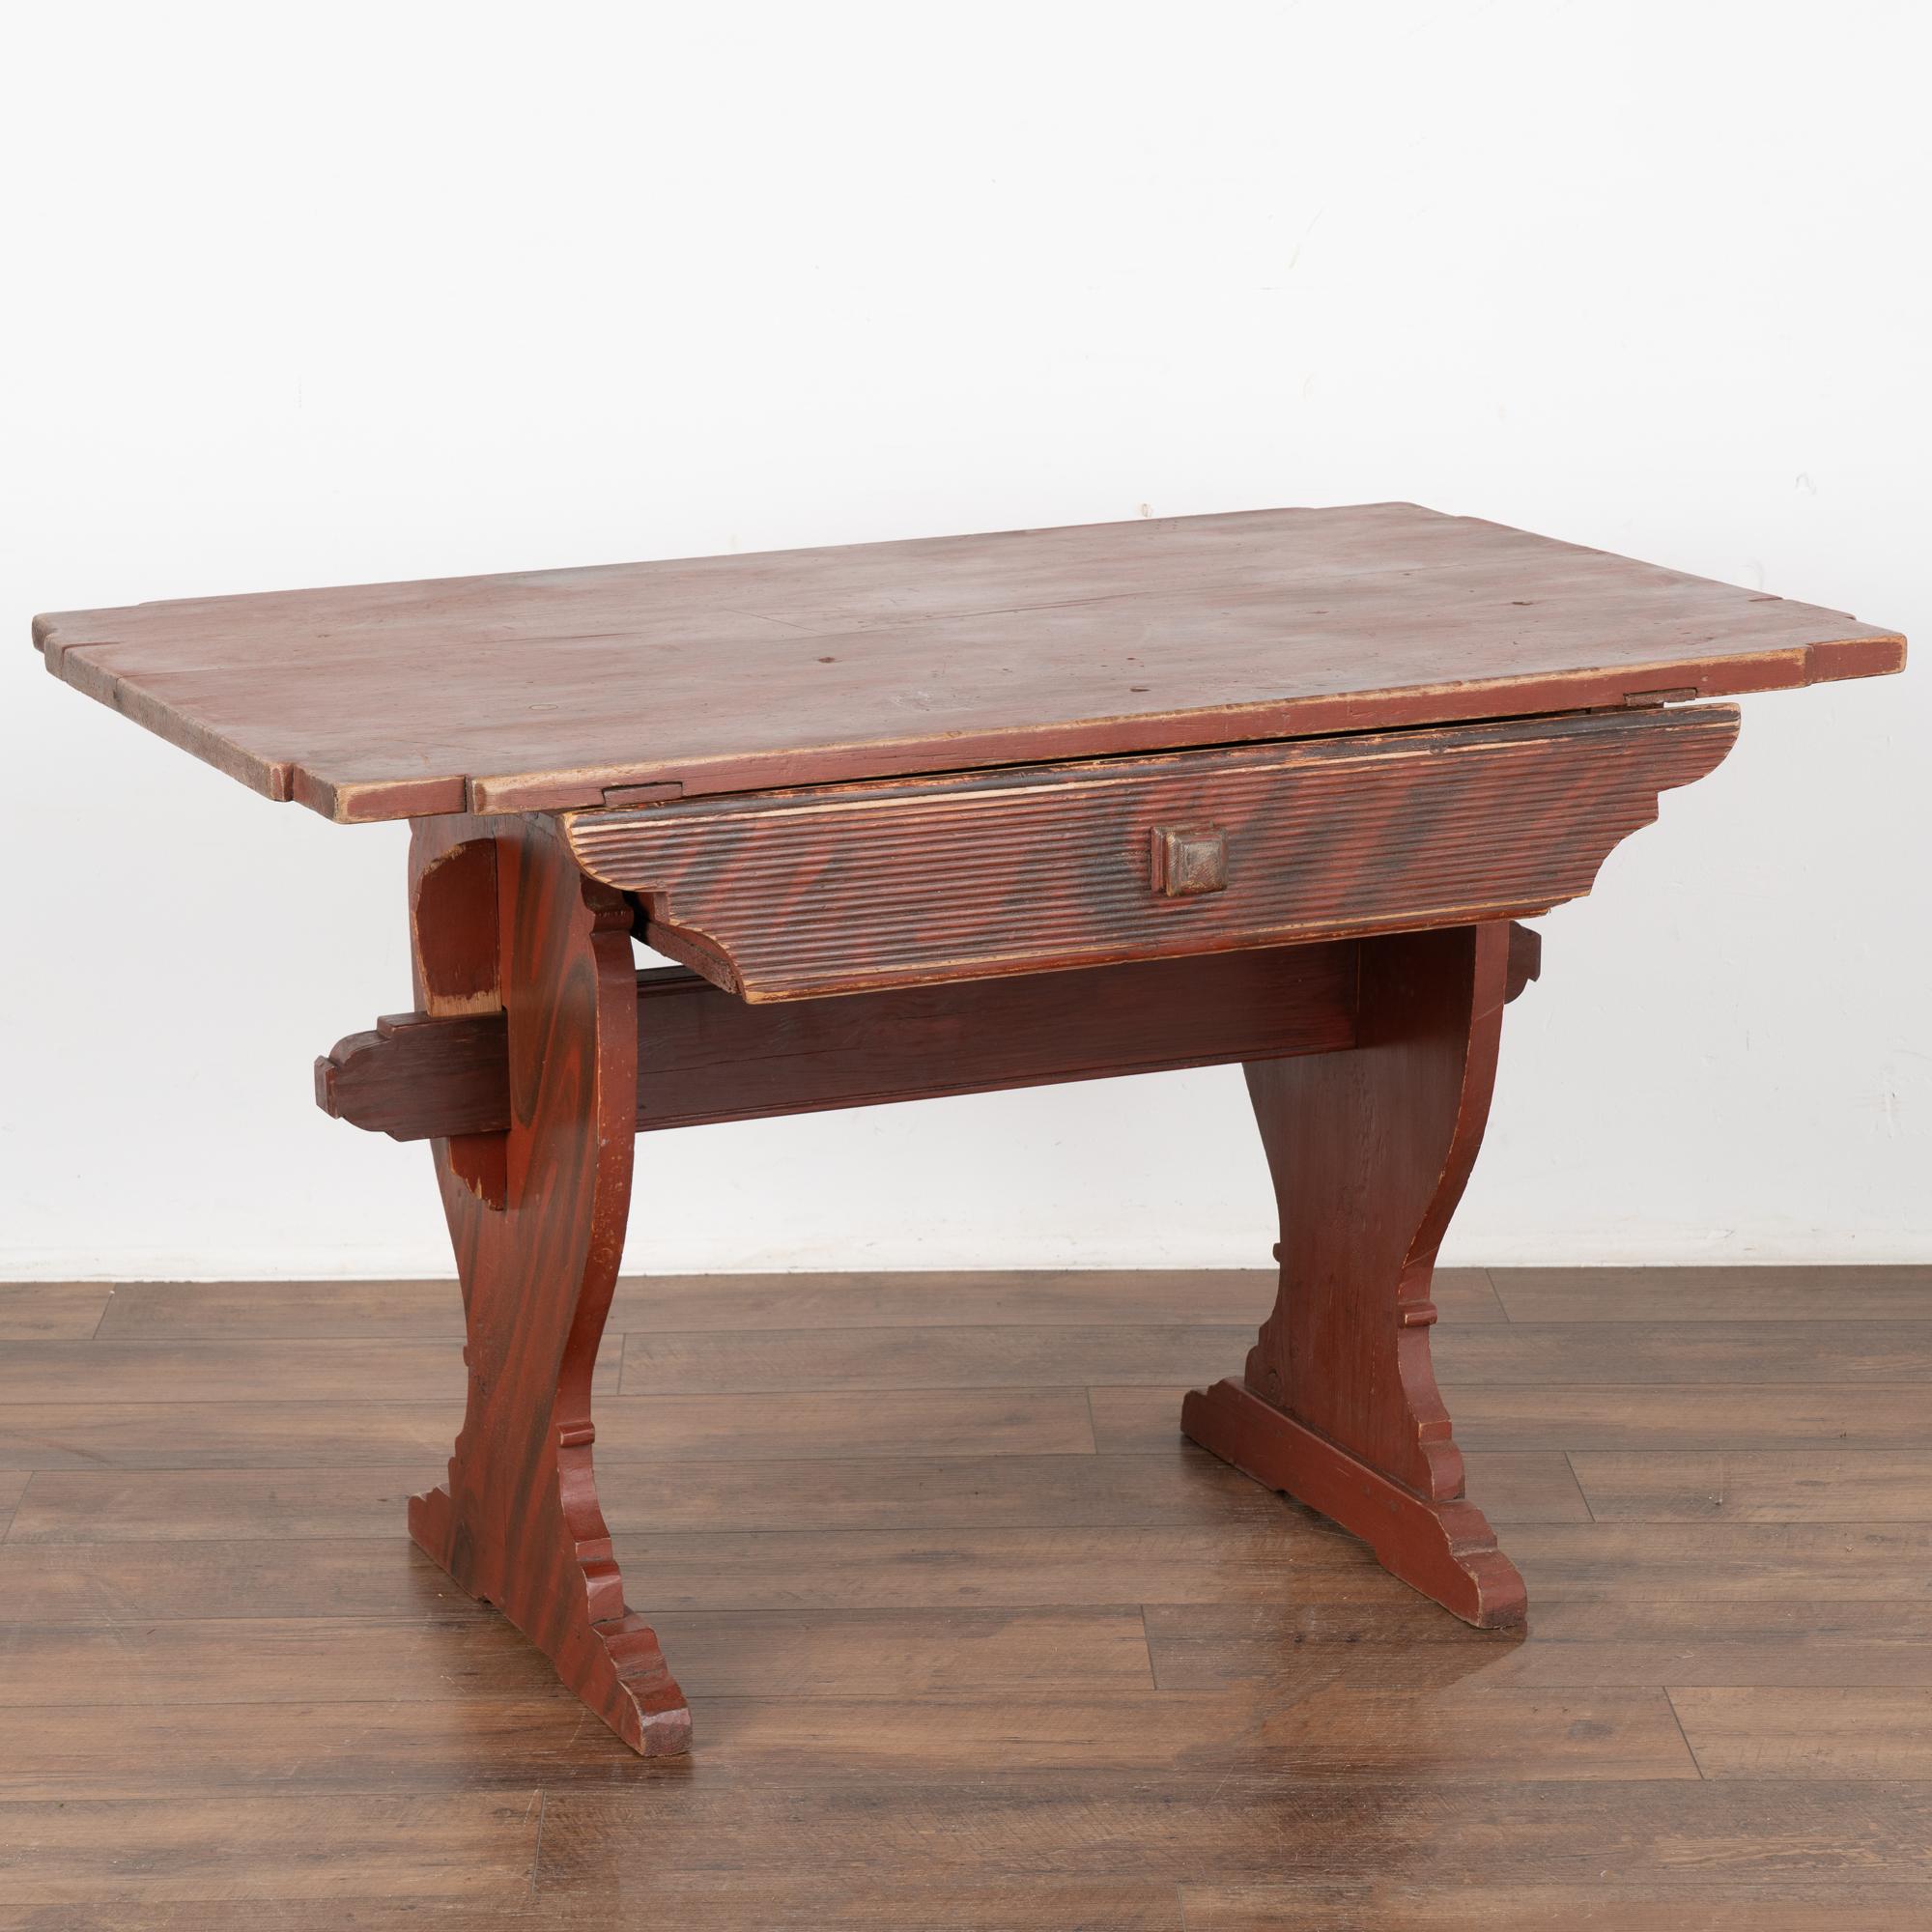 This delightful pine farm table comes from the Swedish countryside. The original faux wood painted finish was the traditional style of the era (almost 200 years old).
The original folk art painted finish is a combination of brick red and black which